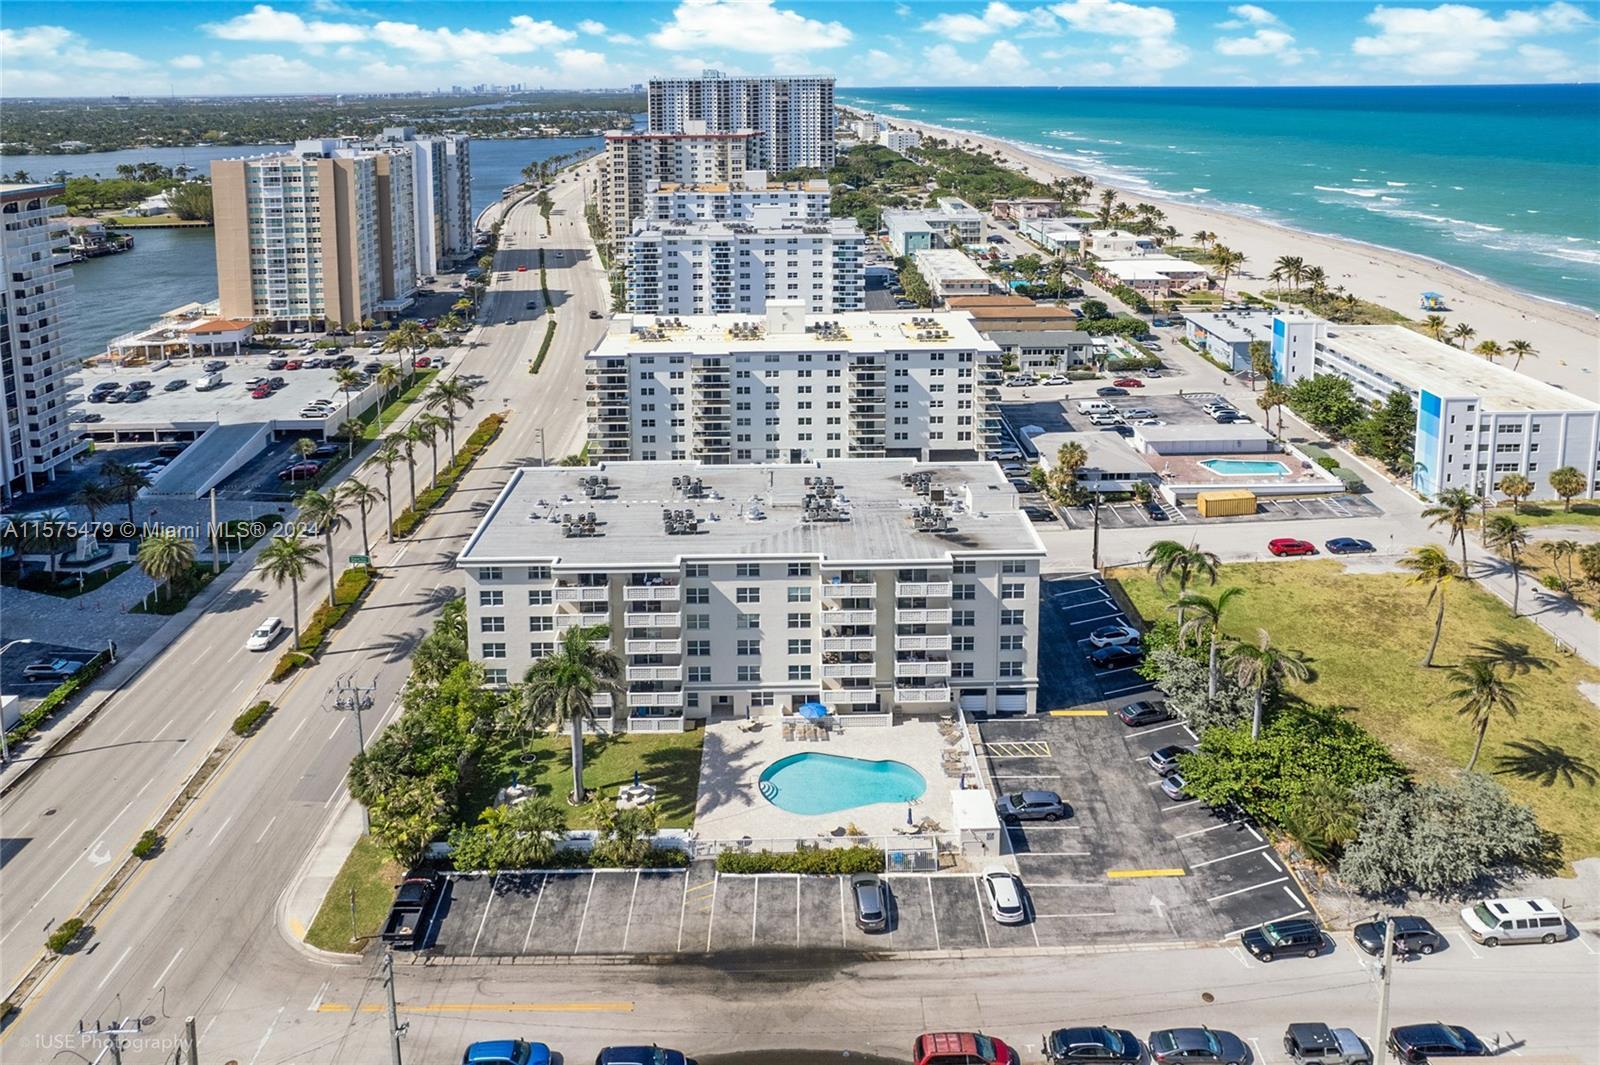 Photo of 1901 S Ocean Dr #303 in Hollywood, FL